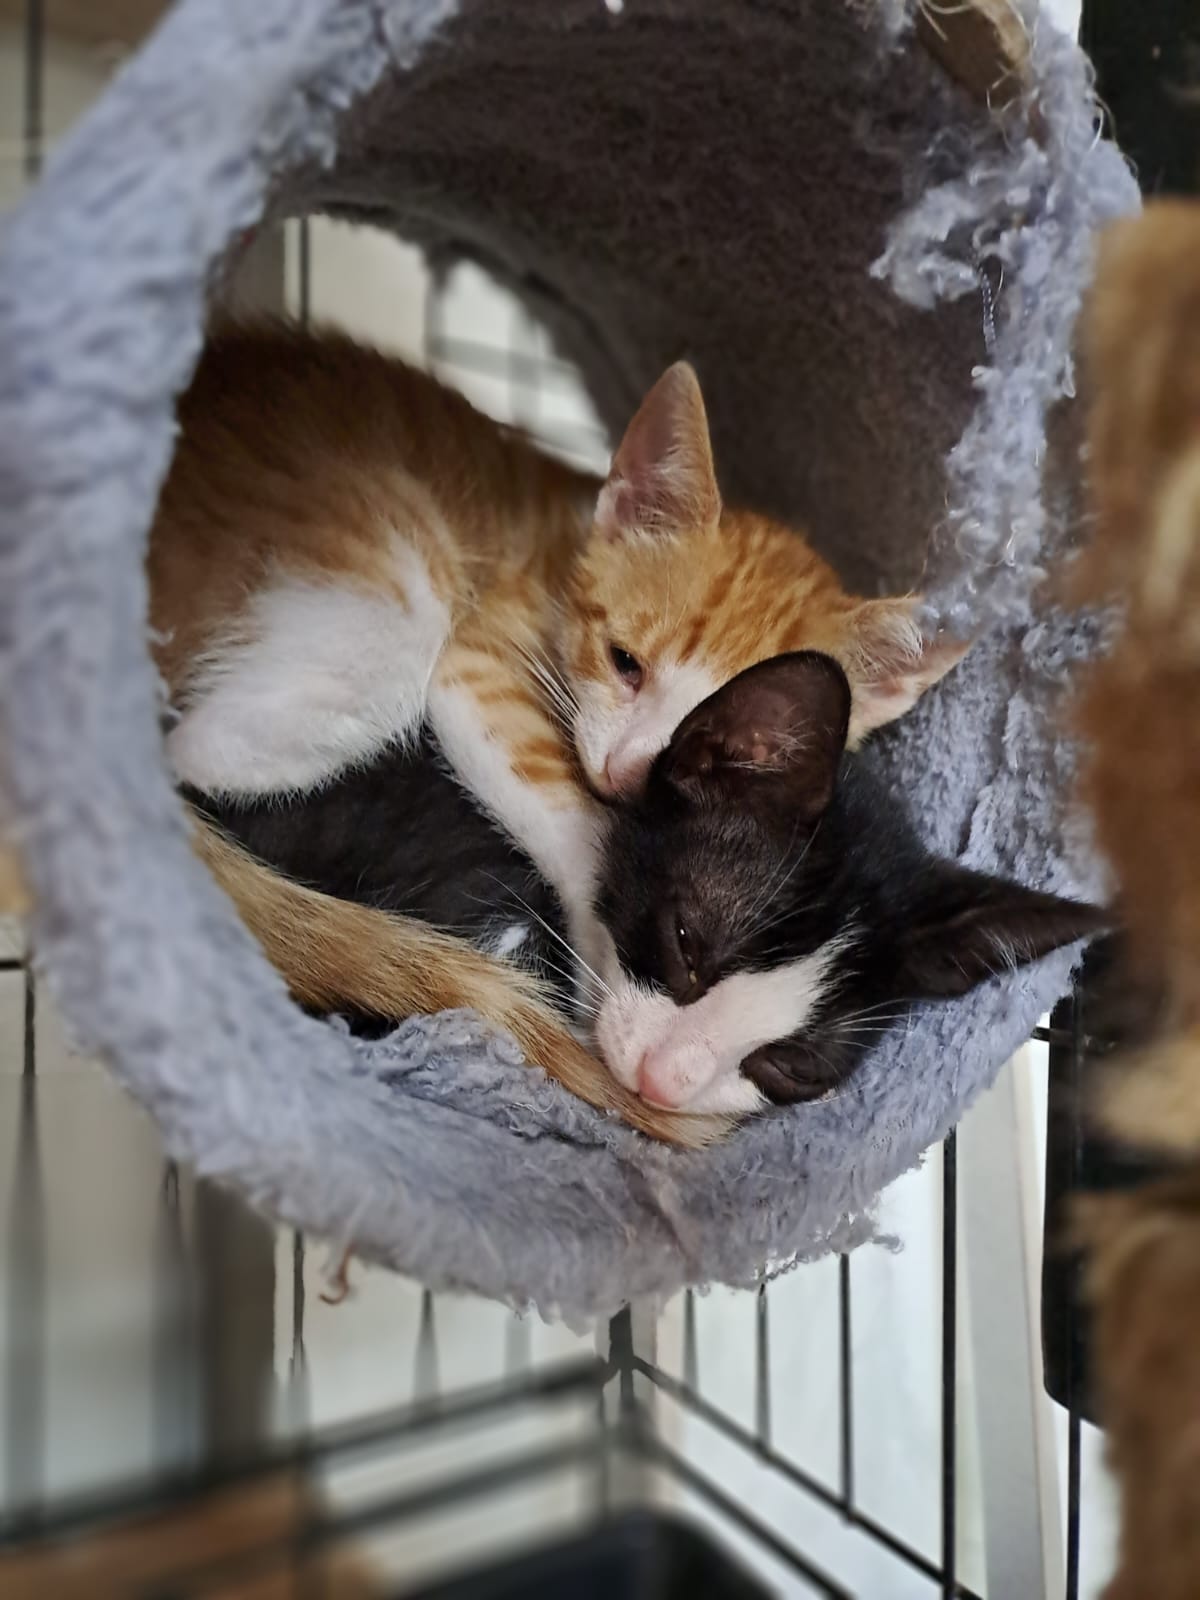 Thai & Po, two adorable male kittens, each filled with boundless potential for love and companionship. Although a bit on the skittish side, they are eagerly waiting to find their perfect home